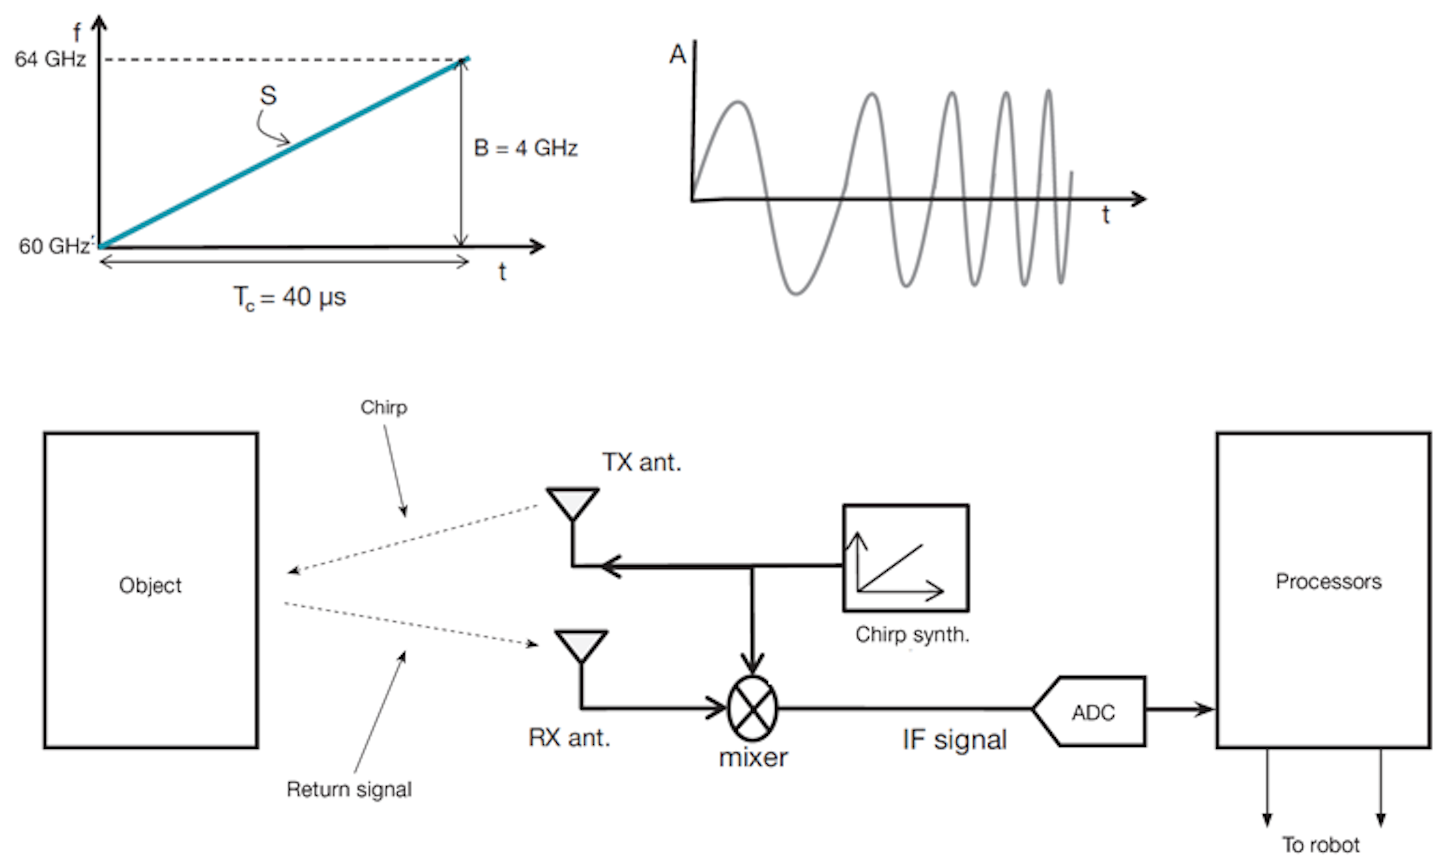 2. How the radar sensors work: They transmit an FMCW signal (chip), which is reflected back from remote objects and mixed with the original chirp. The time difference between the two is used to calculate distance.